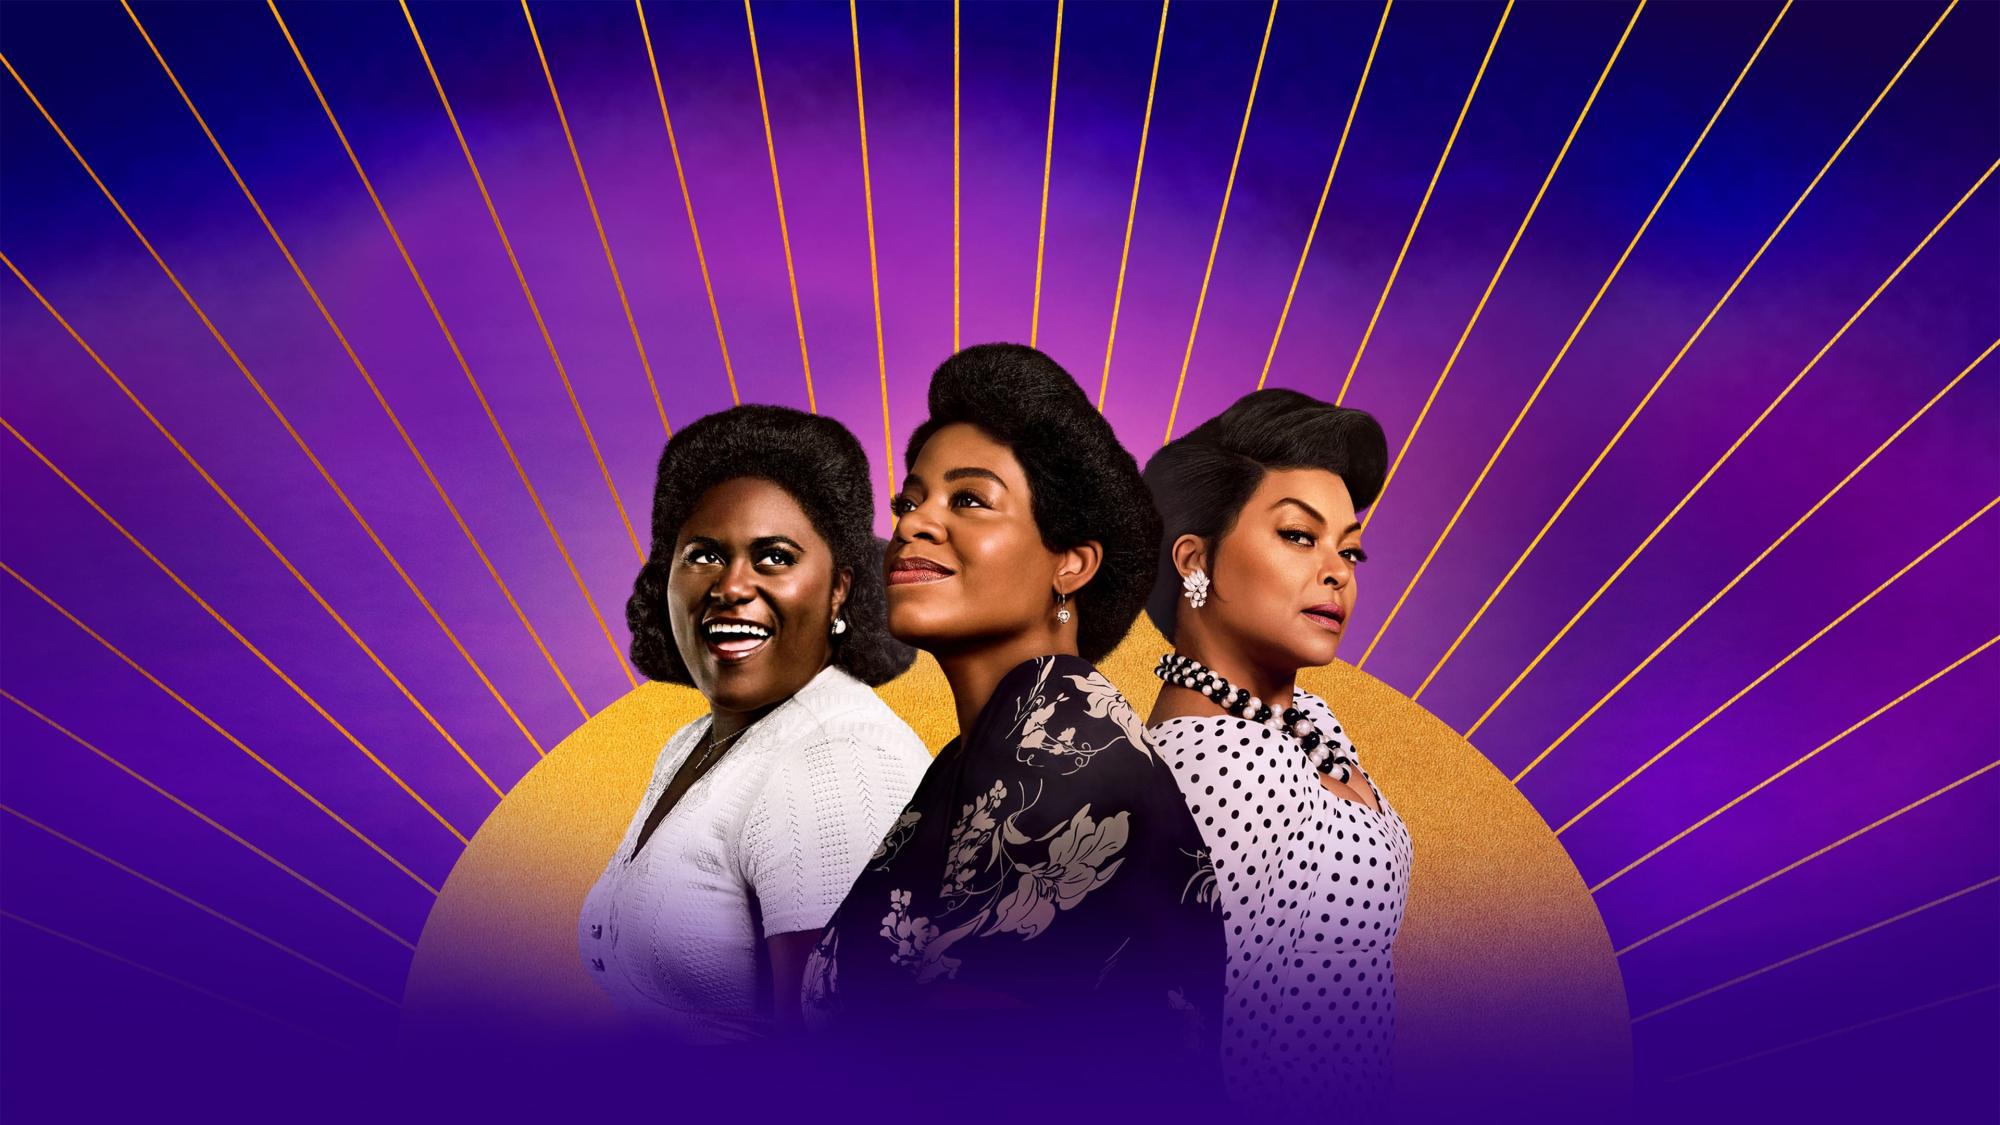 Backdrop Image for The Color Purple